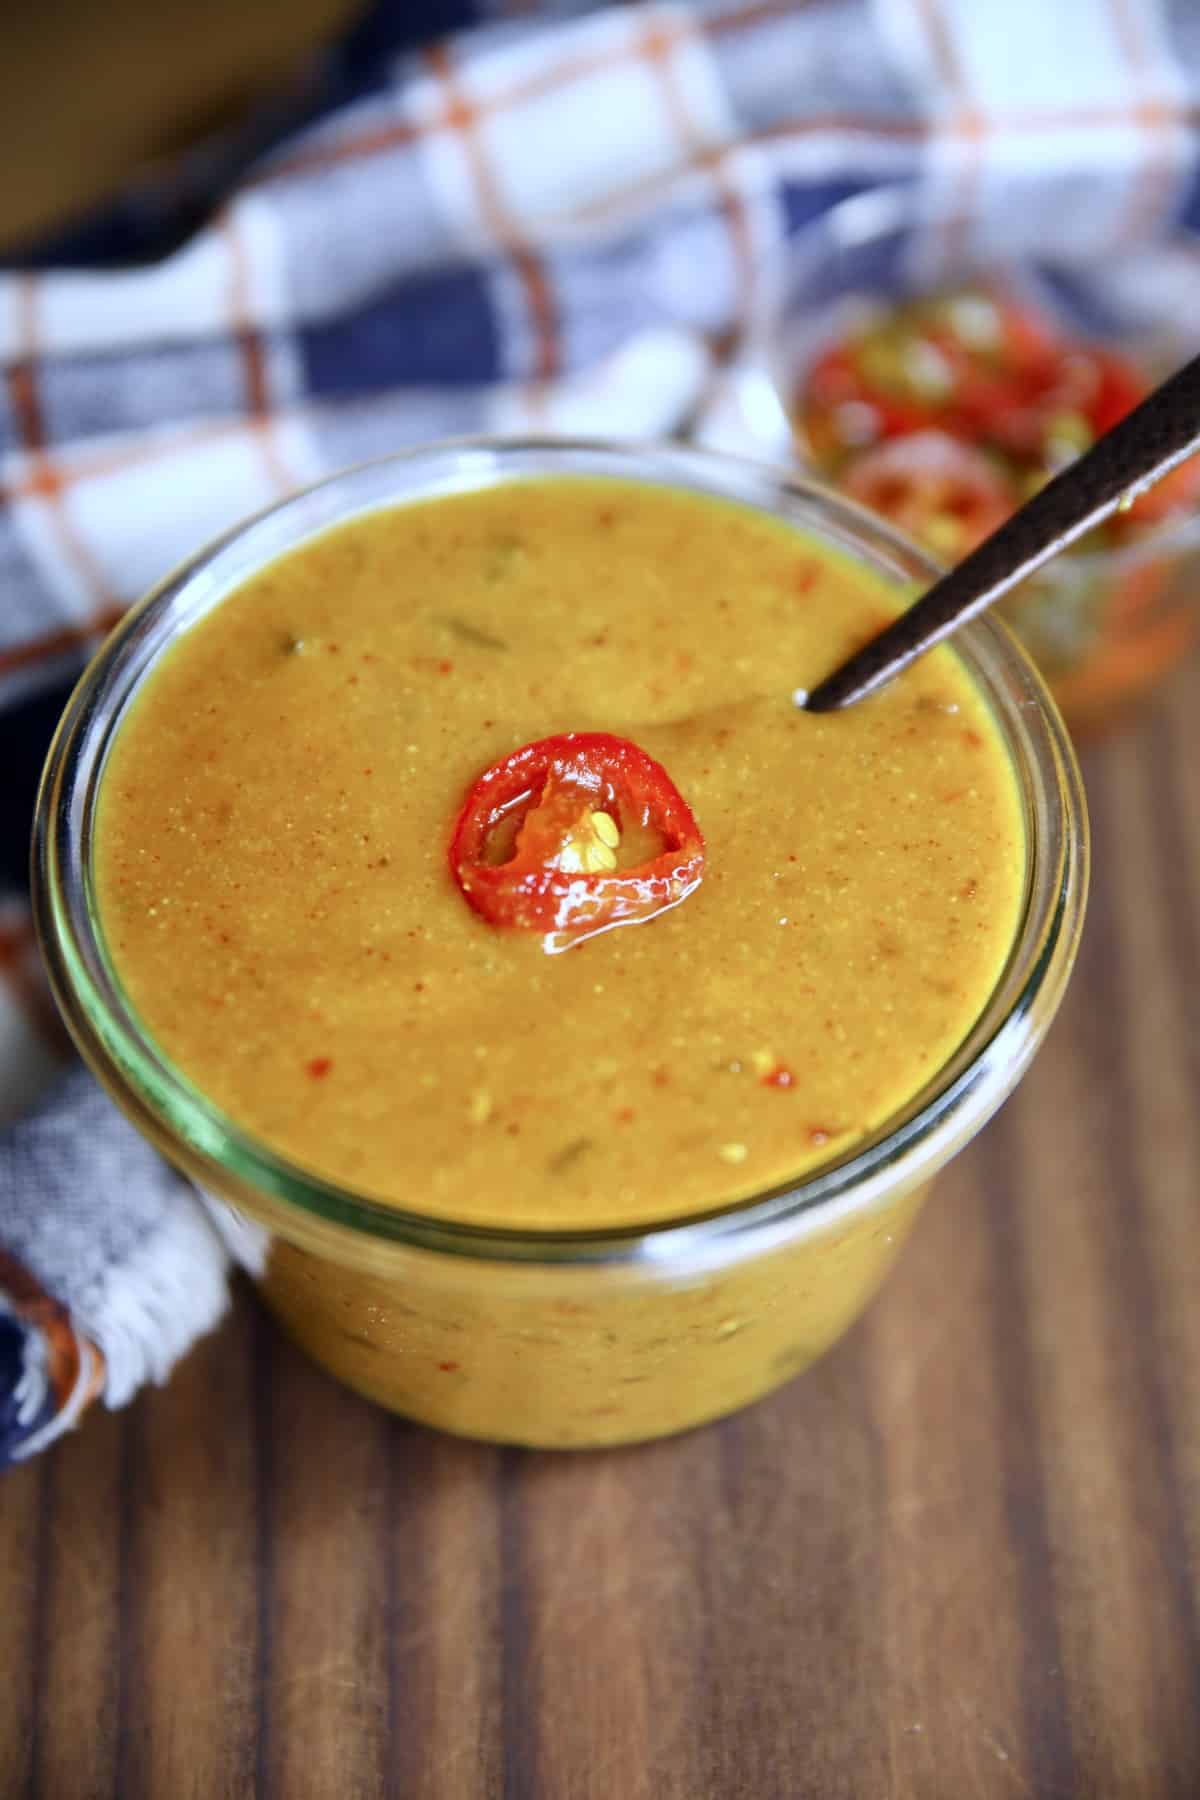 Jar of sweet and spicy mustard.